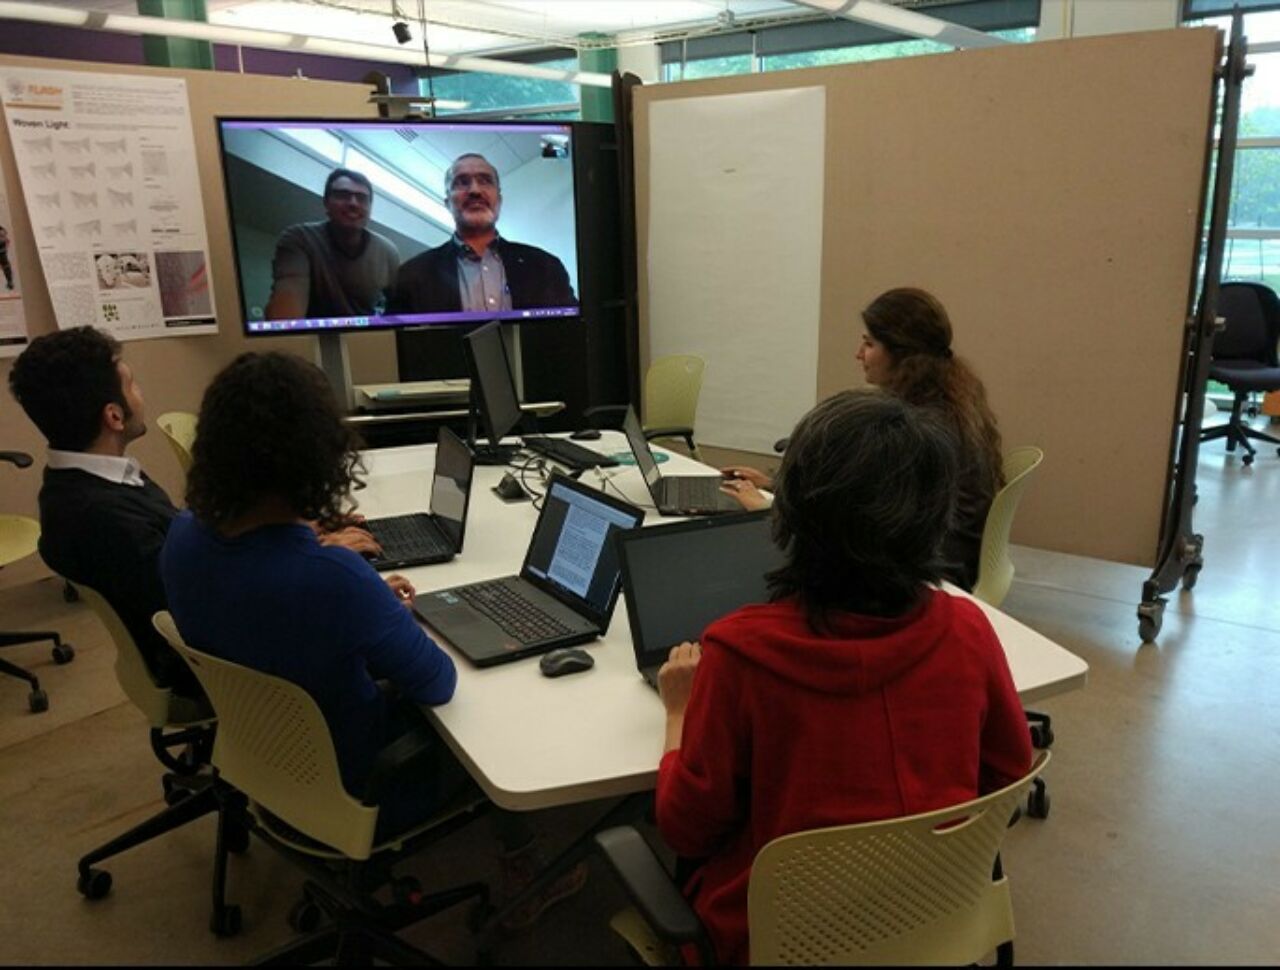 Students sitting around a conference table videoconferencing with a researcher.